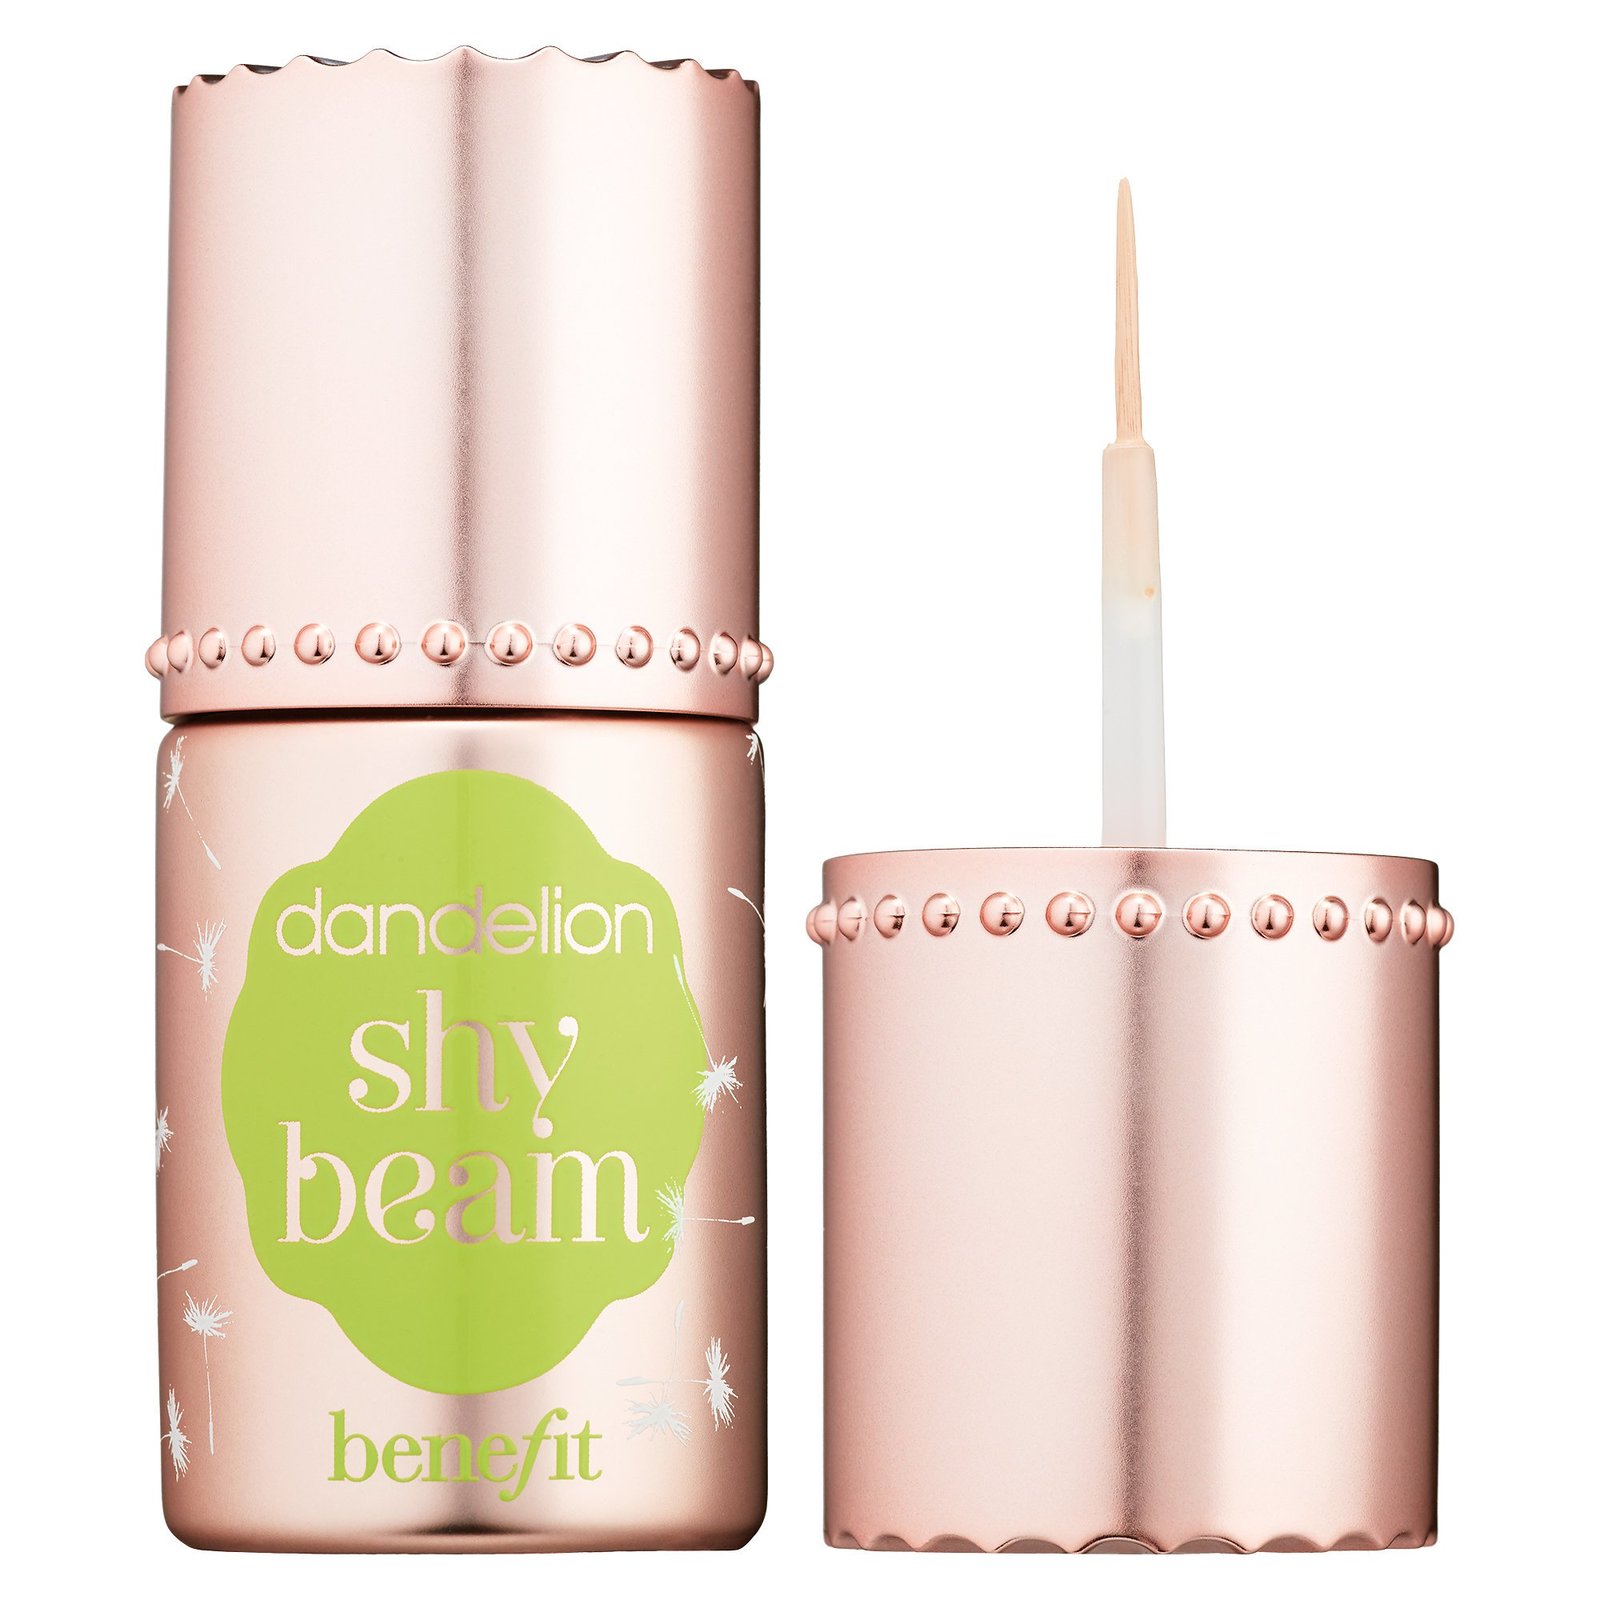 Primary image for Benefit Cosmetics Dandelion Shy Beam Matte Highlighter .33 oz